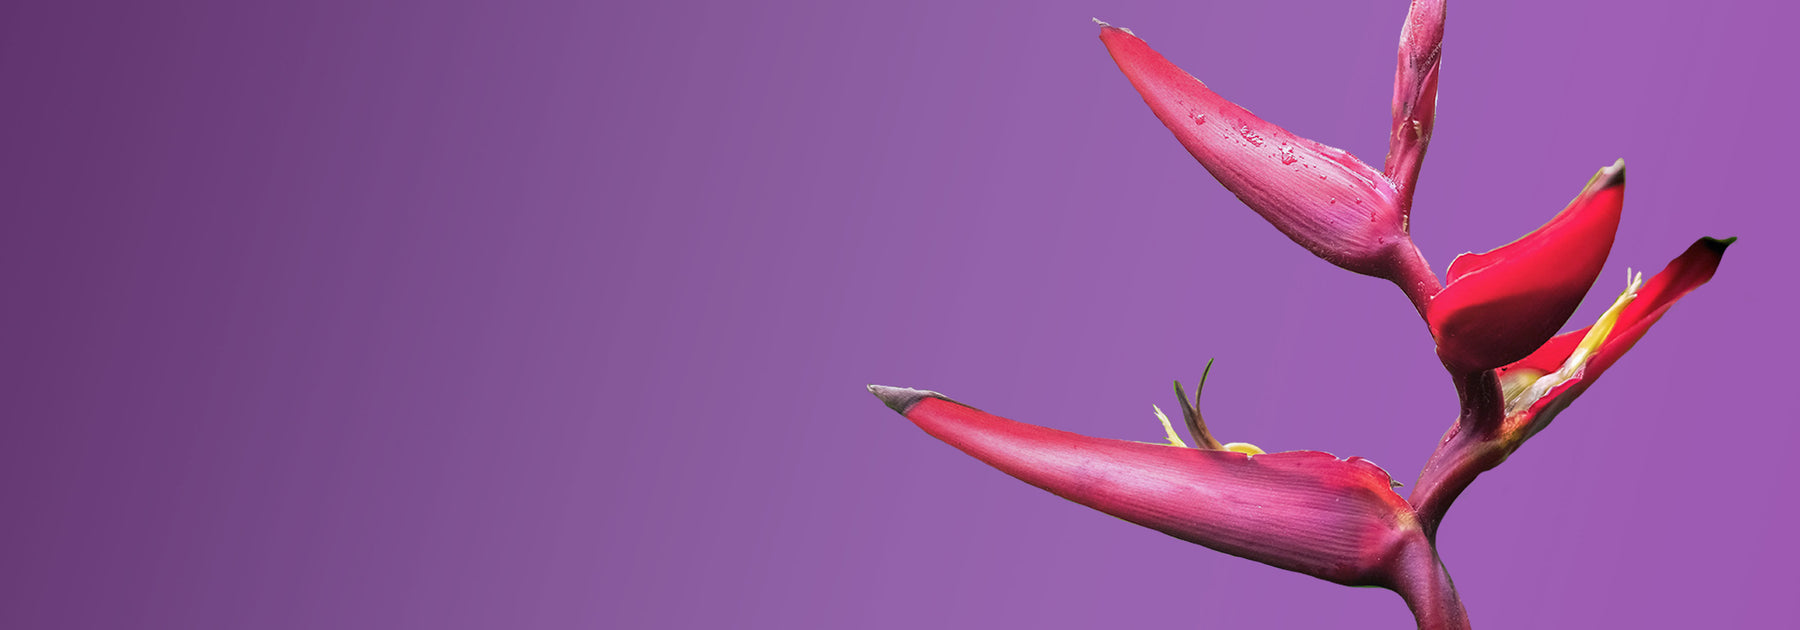 Close-up of a Heliconia Flower in front of a purple background